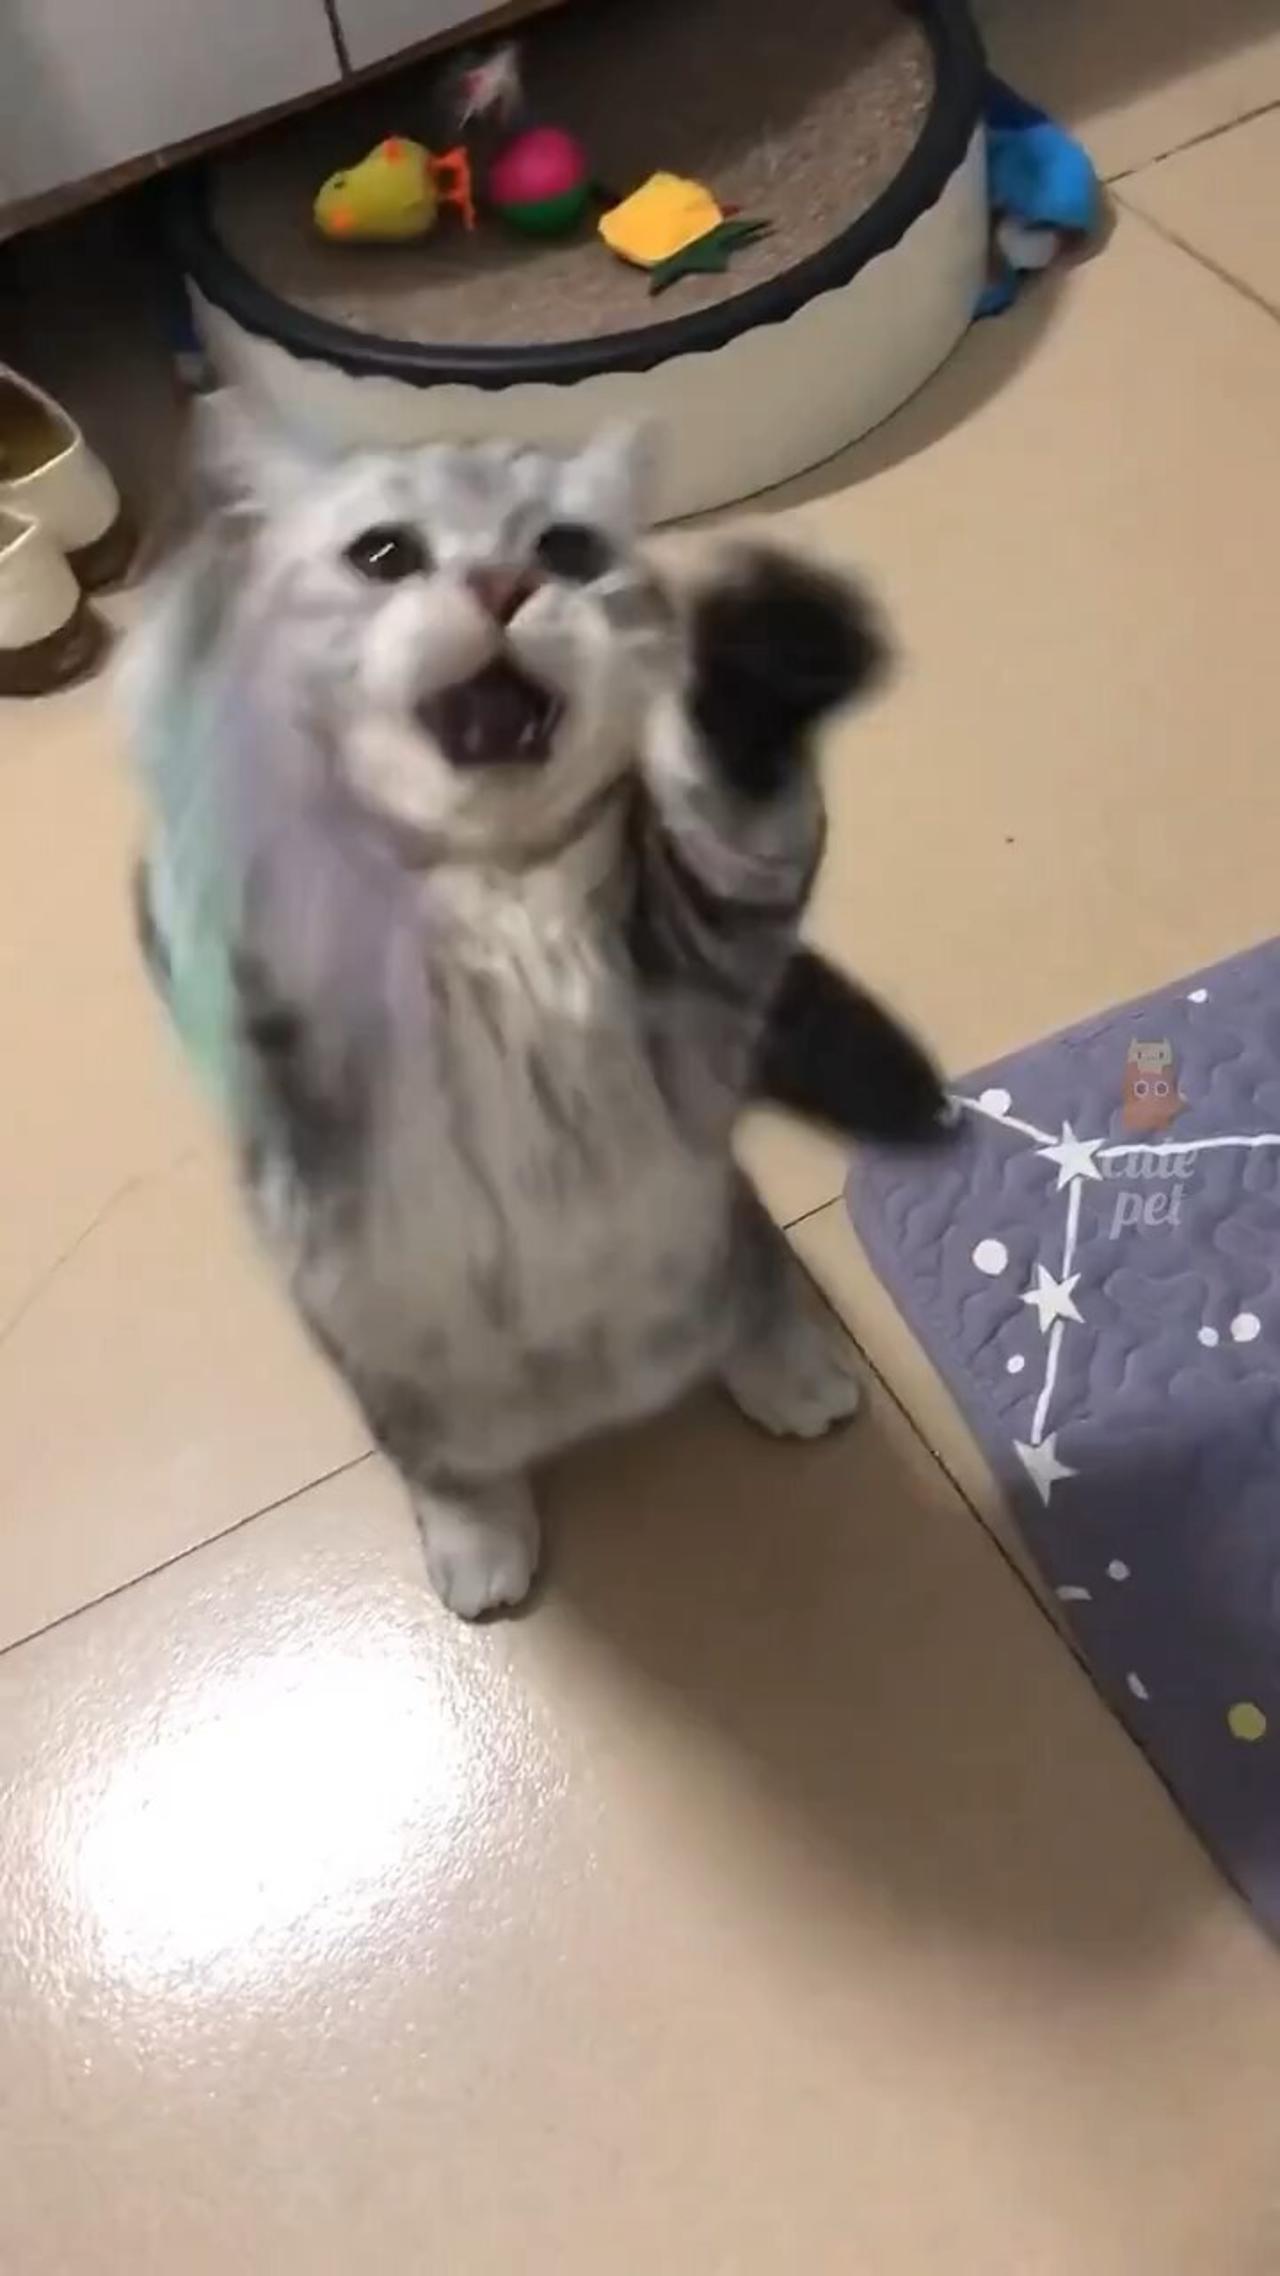 Funny cat clips 😂😂😂🤣🤣